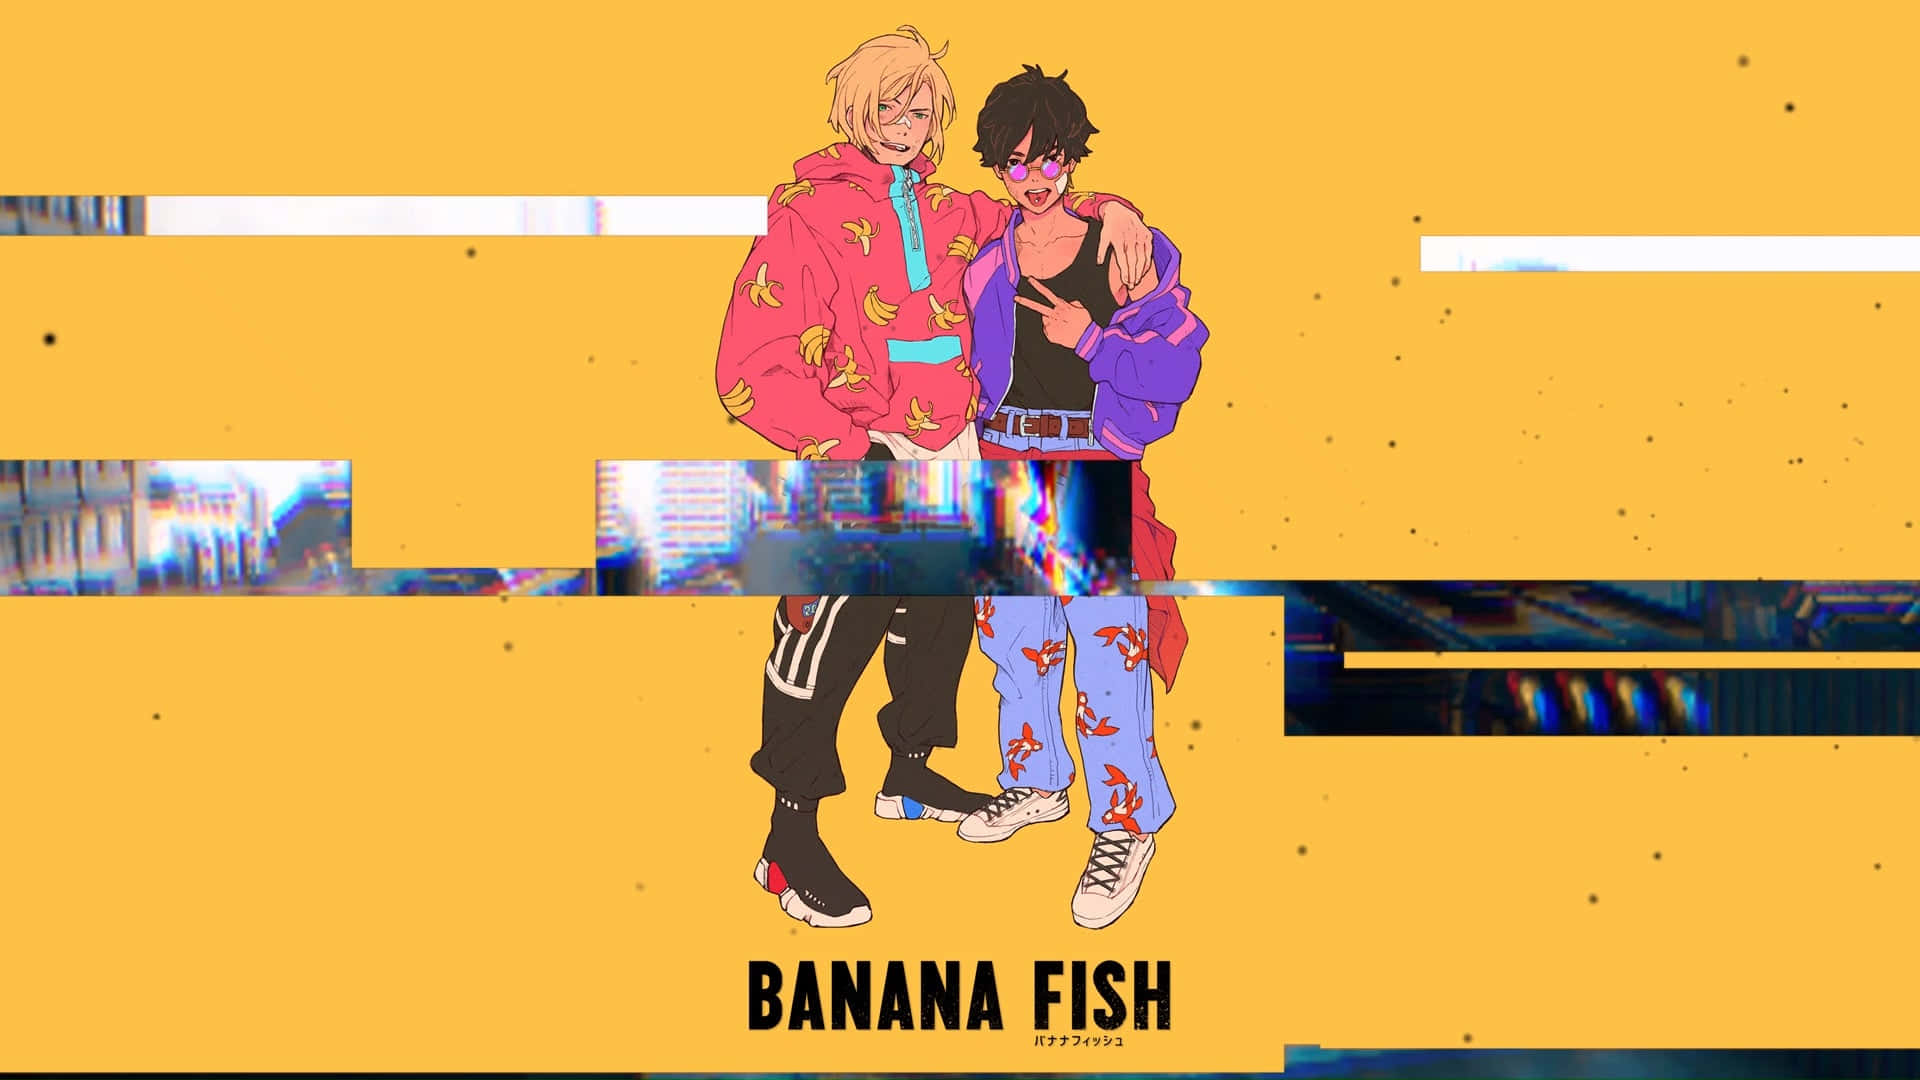 "The tragedy of Ash and Eiji in Banana Fish"